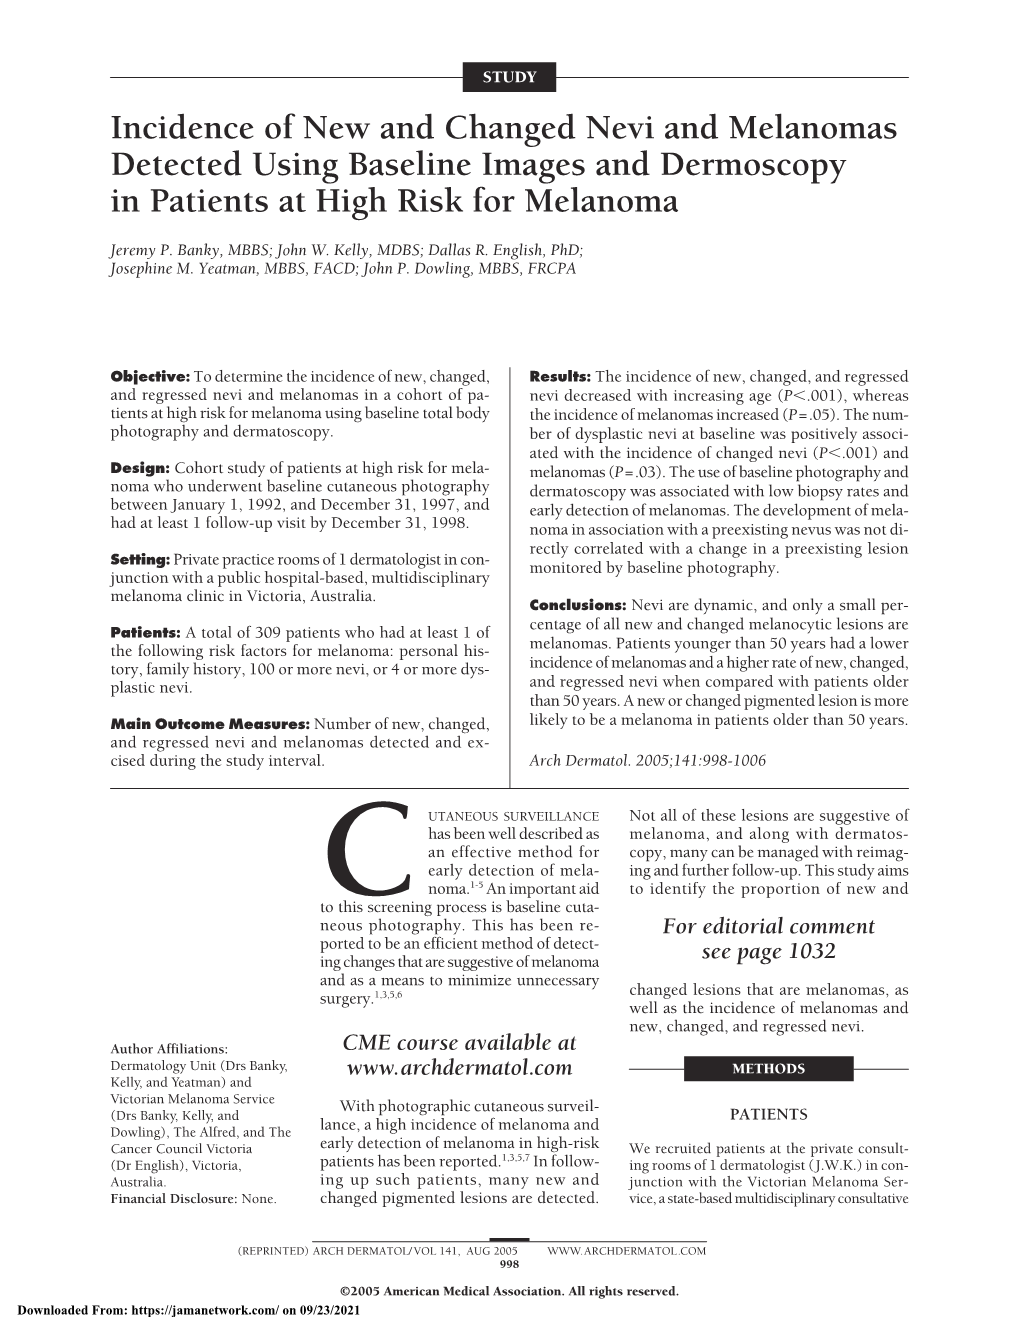 Incidence of New and Changed Nevi and Melanomas Detected Using Baseline Images and Dermoscopy in Patients at High Risk for Melanoma